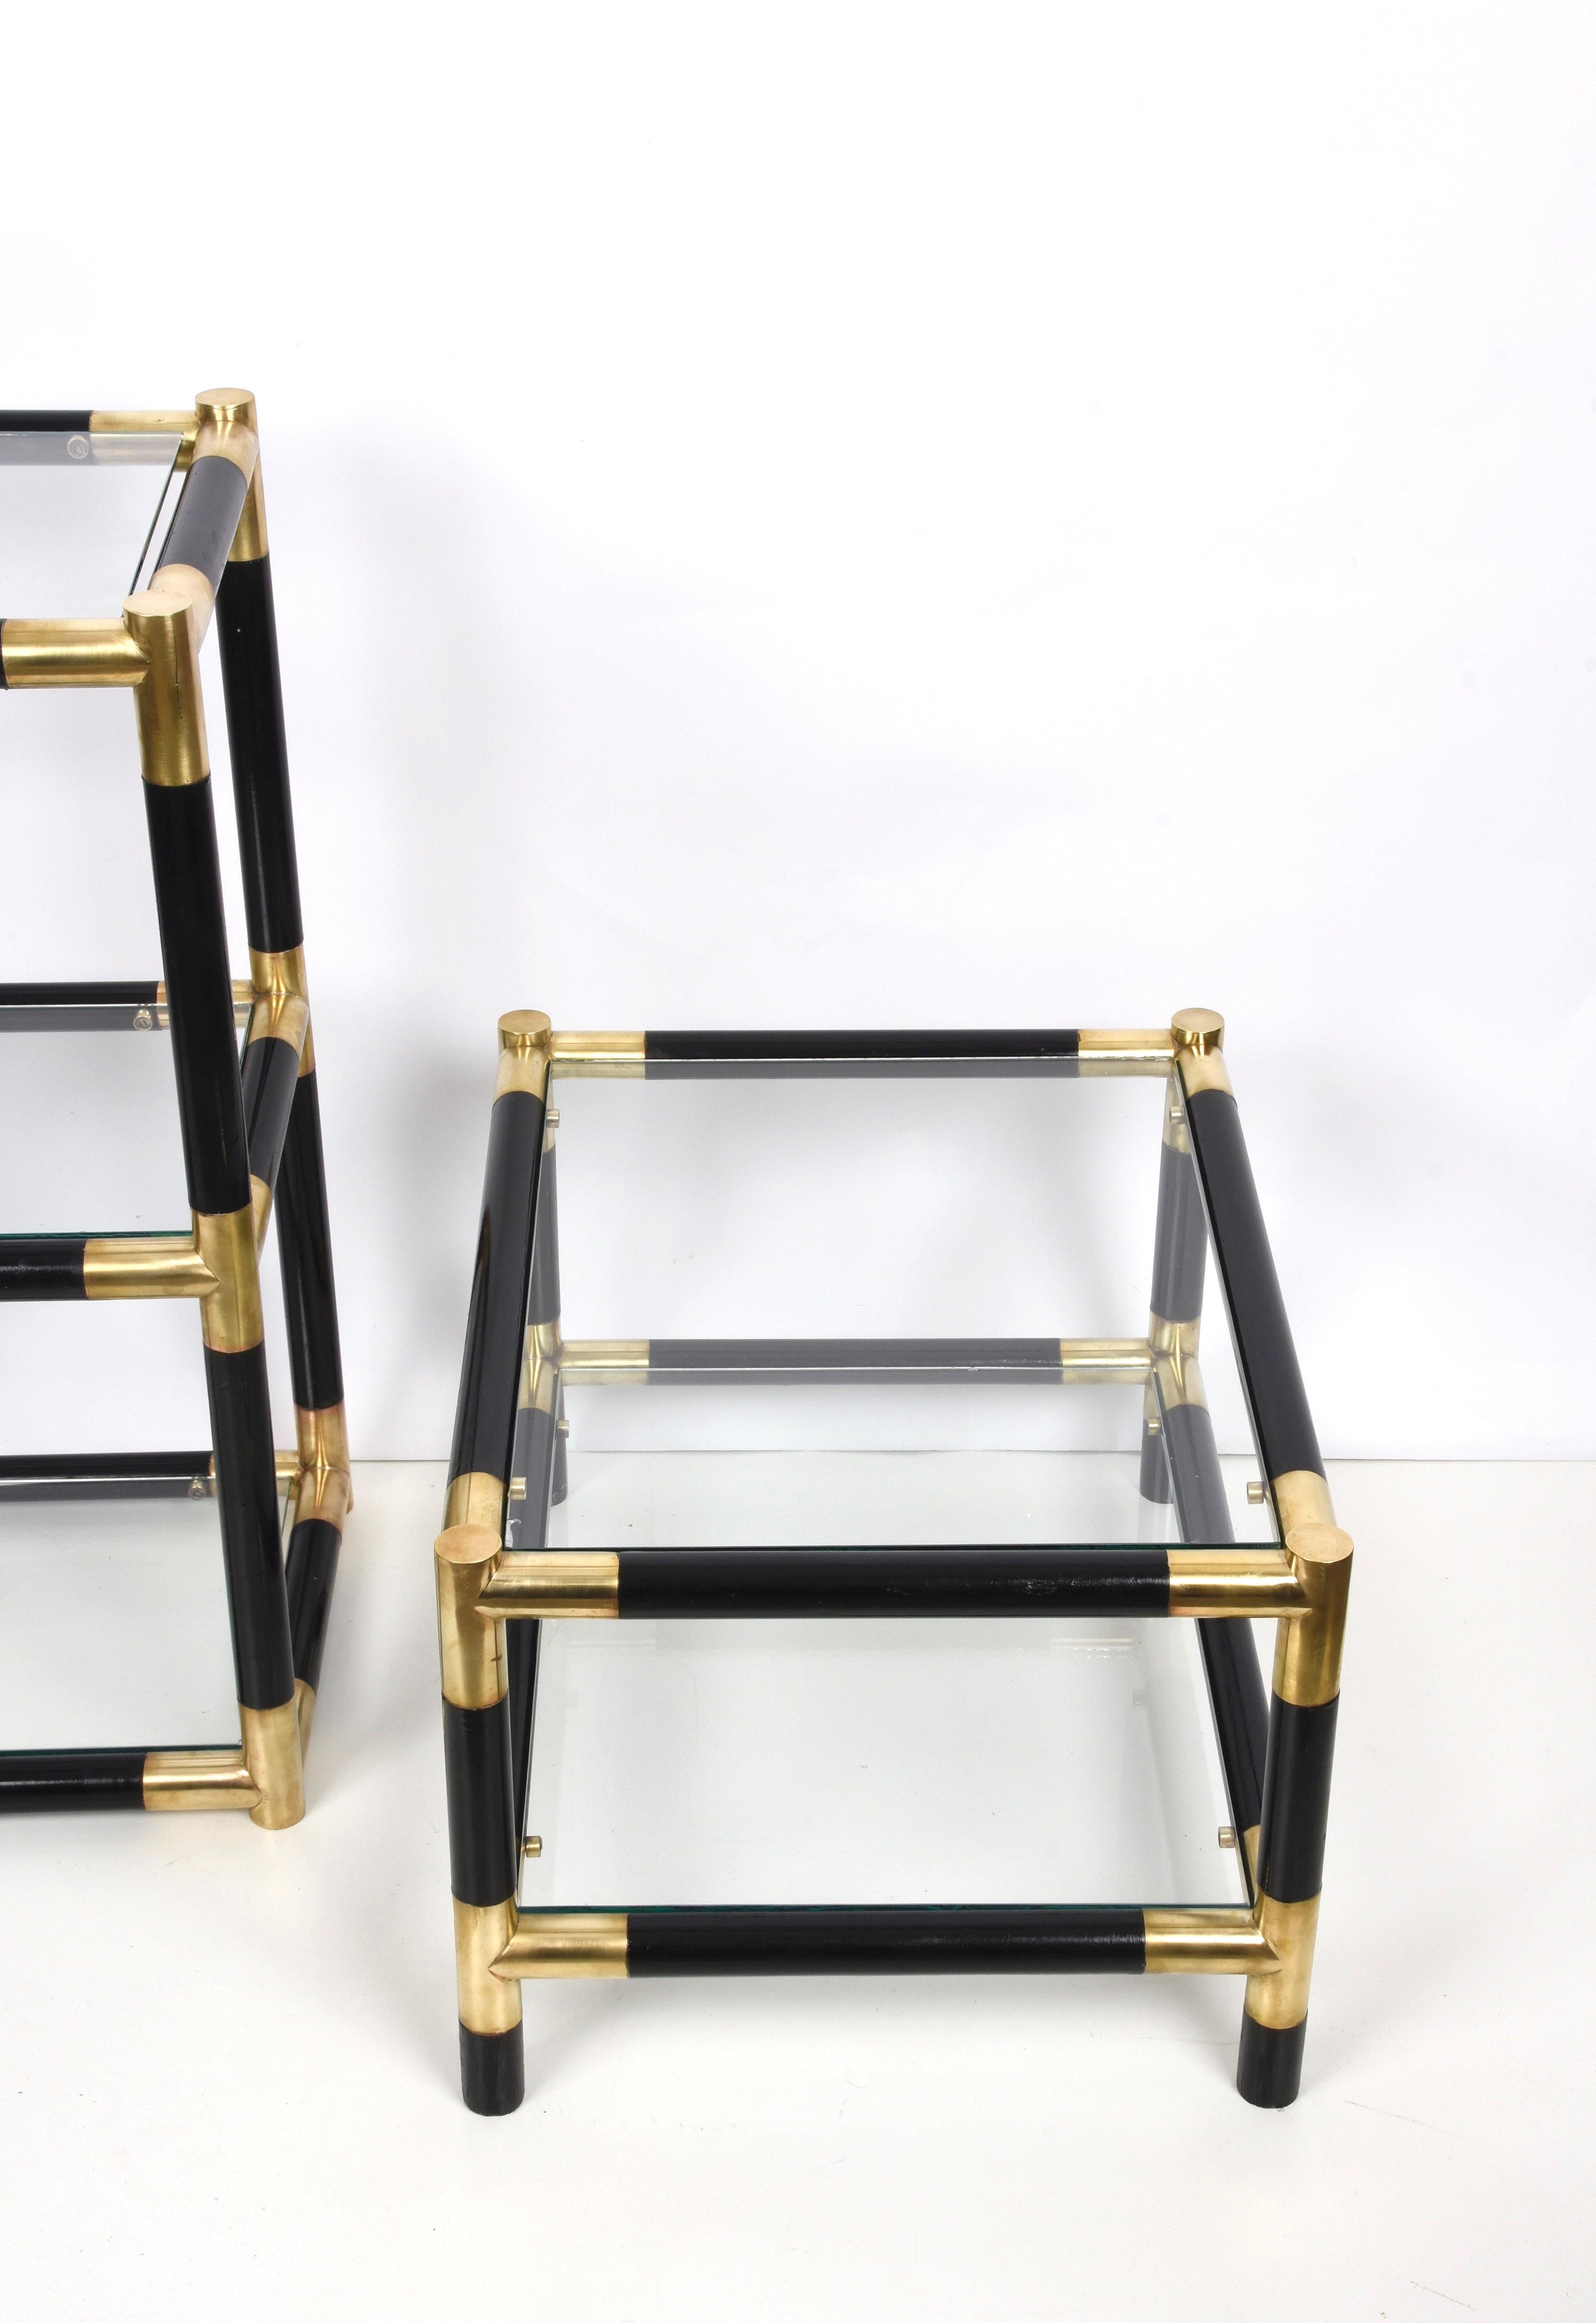 Midcentury Wood and Brass Italian Side Table with Two Crystal Shelves, 1970s For Sale 4